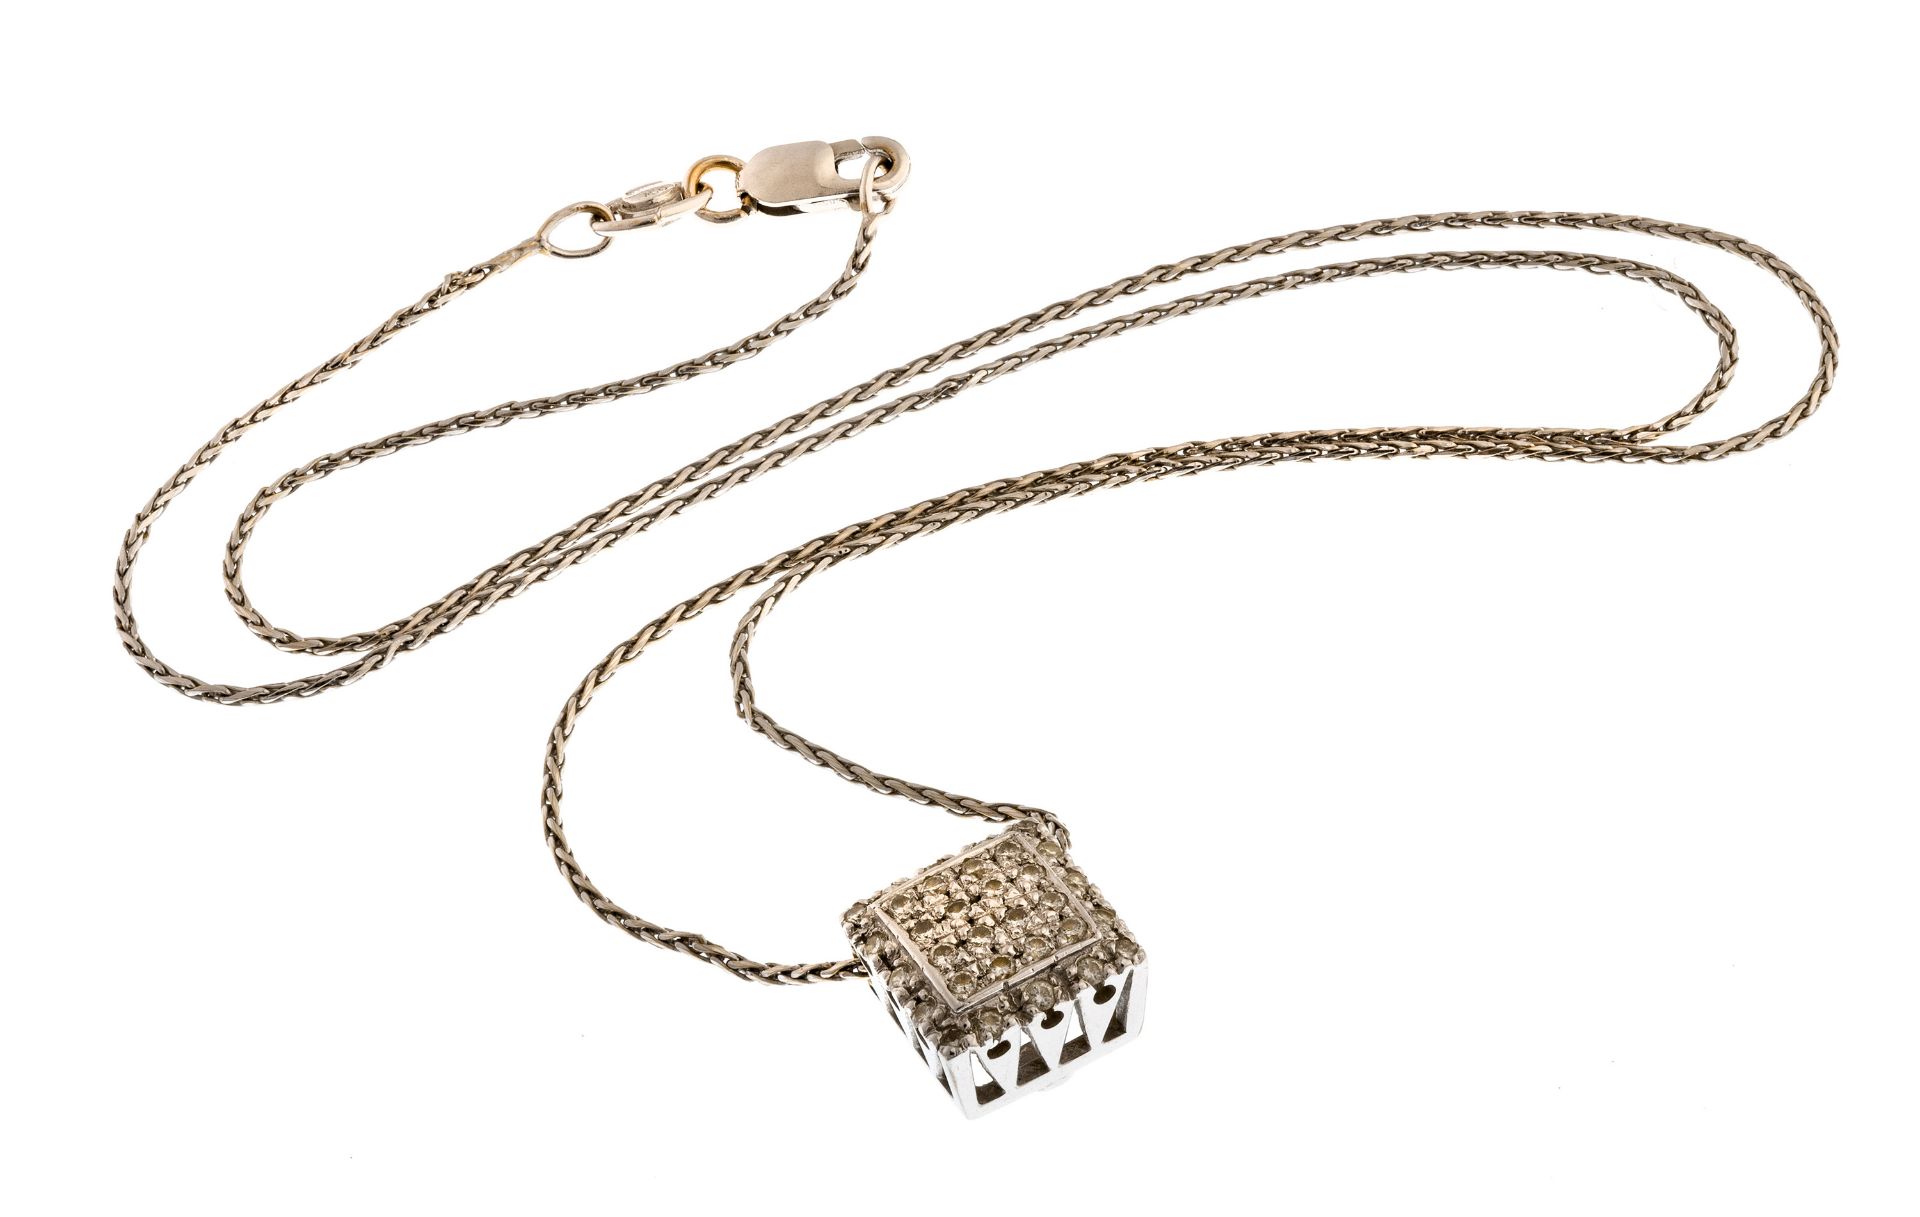 WHITE GOLD NECKLACE WITH DIAMOND PAVE PENDANT